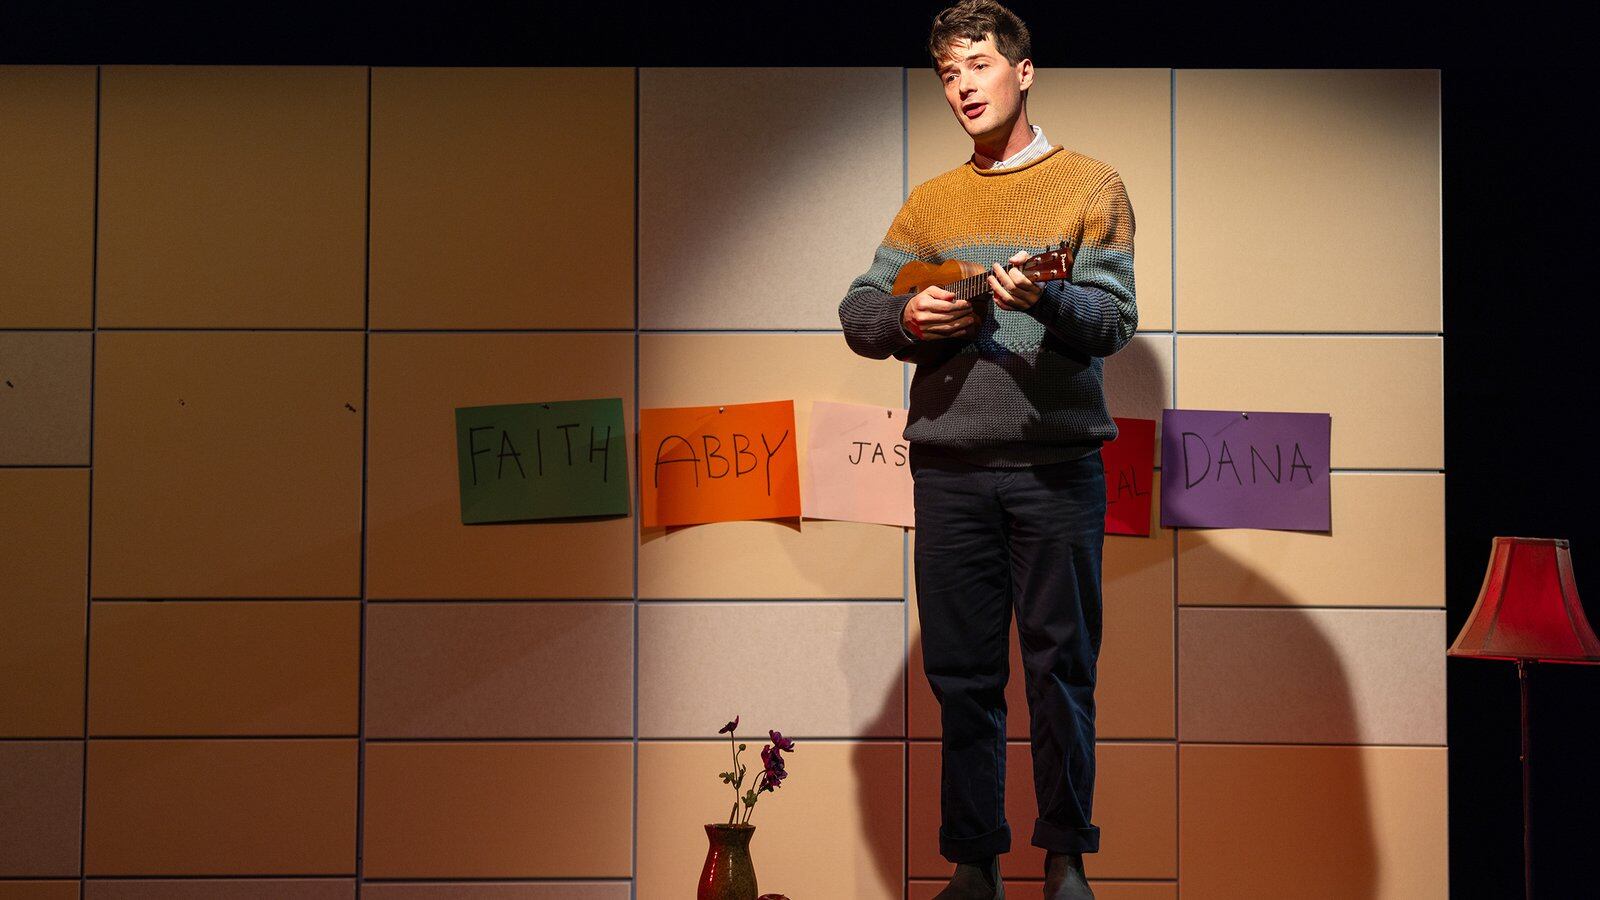 A person with short hair and wearing a multicolored sweater performs on a stage playing a ukulele.